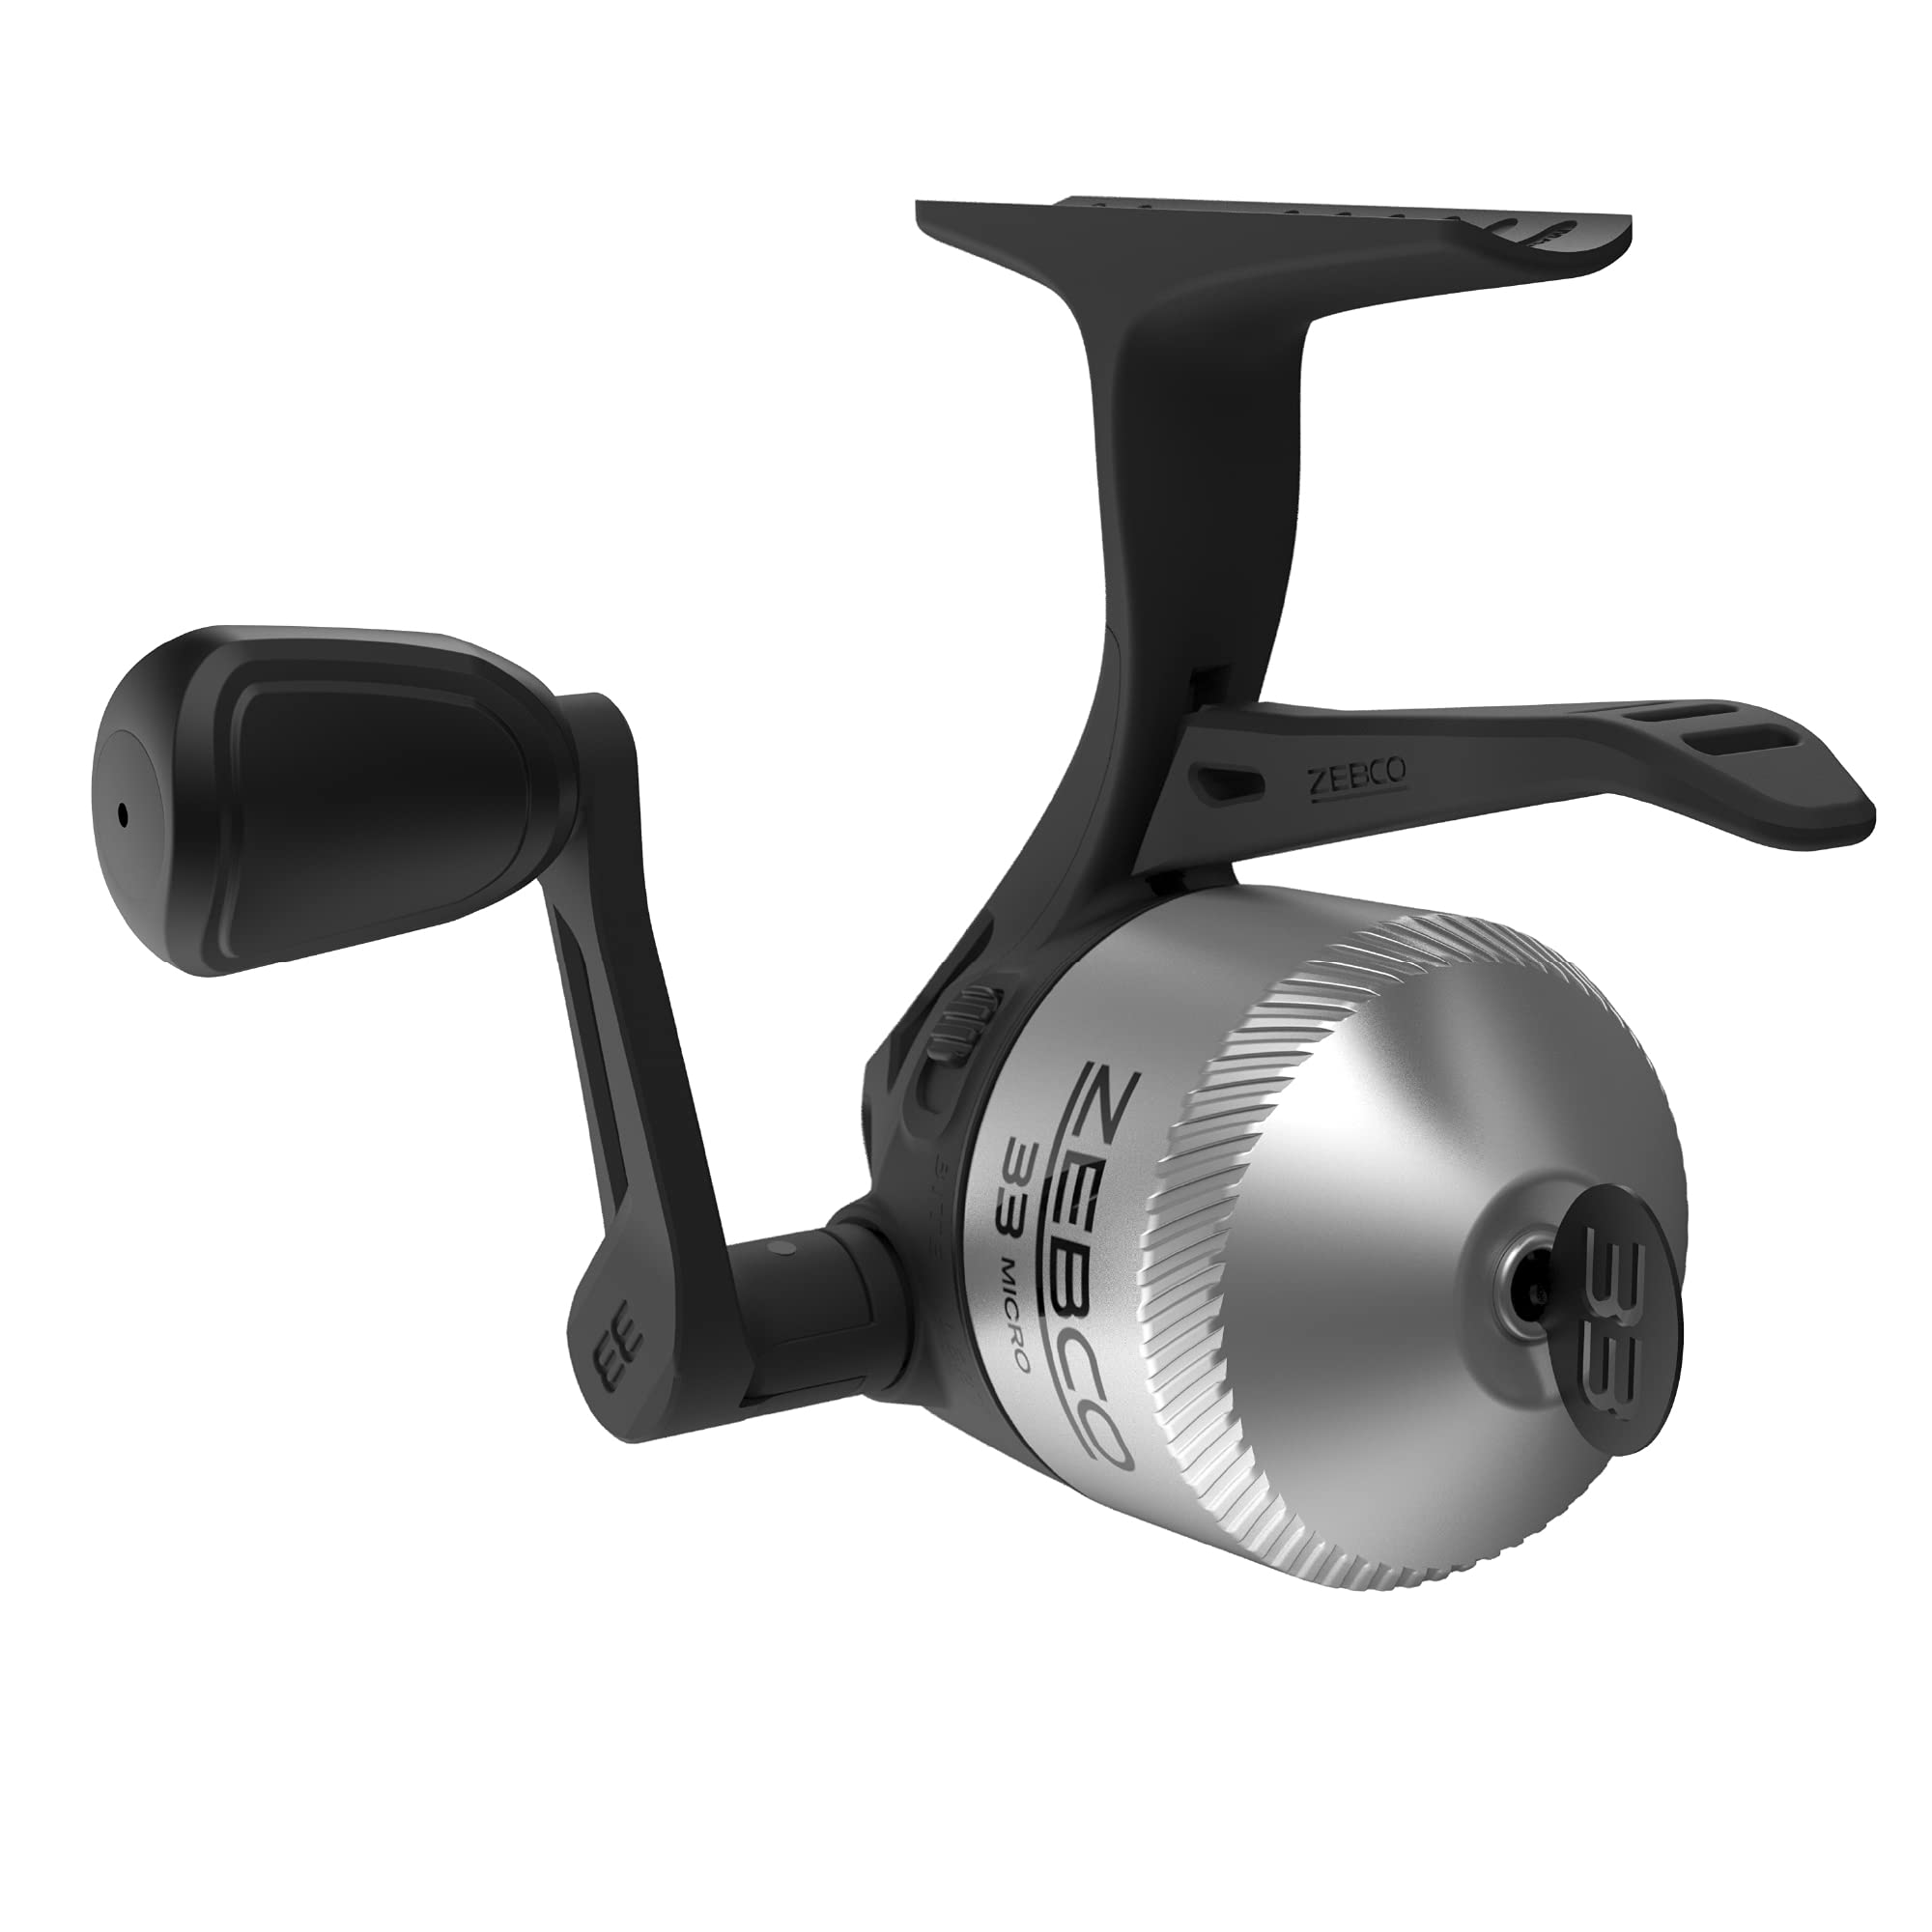 Zebco 33 Spincast Fishing Reel, Quickset Anti-Reverse with Bite Alert,  Smooth Dial-Adjustable Drag, Powerful All-Metal Gears with a Lightweight  Graphite Frame 33 Micro Triggerspin - Silver/Black